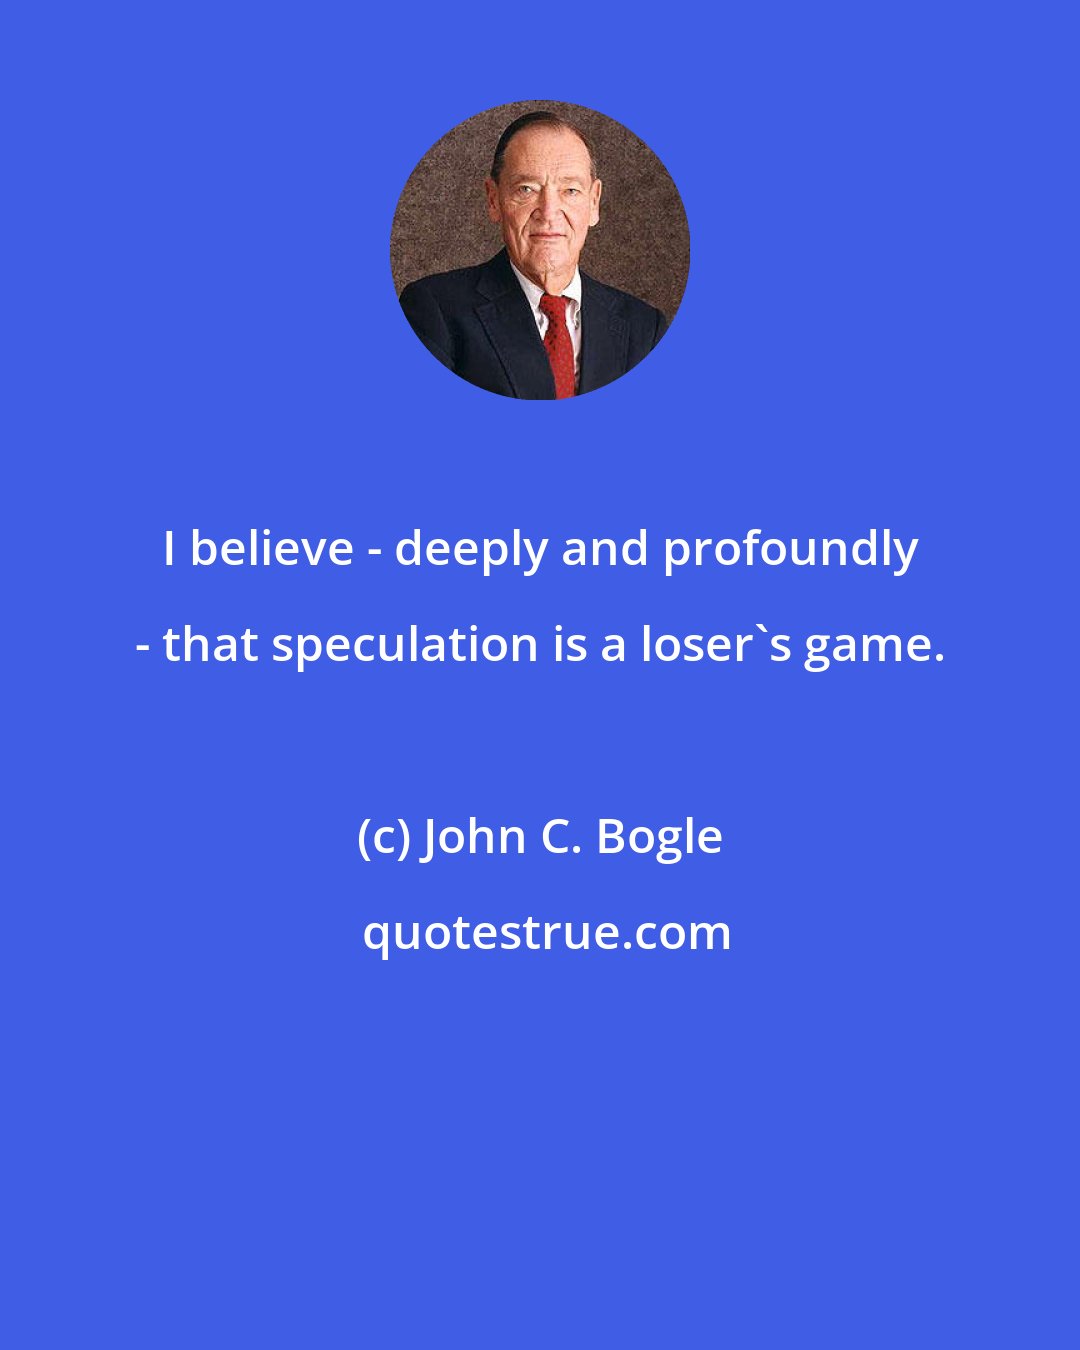 John C. Bogle: I believe - deeply and profoundly - that speculation is a loser's game.